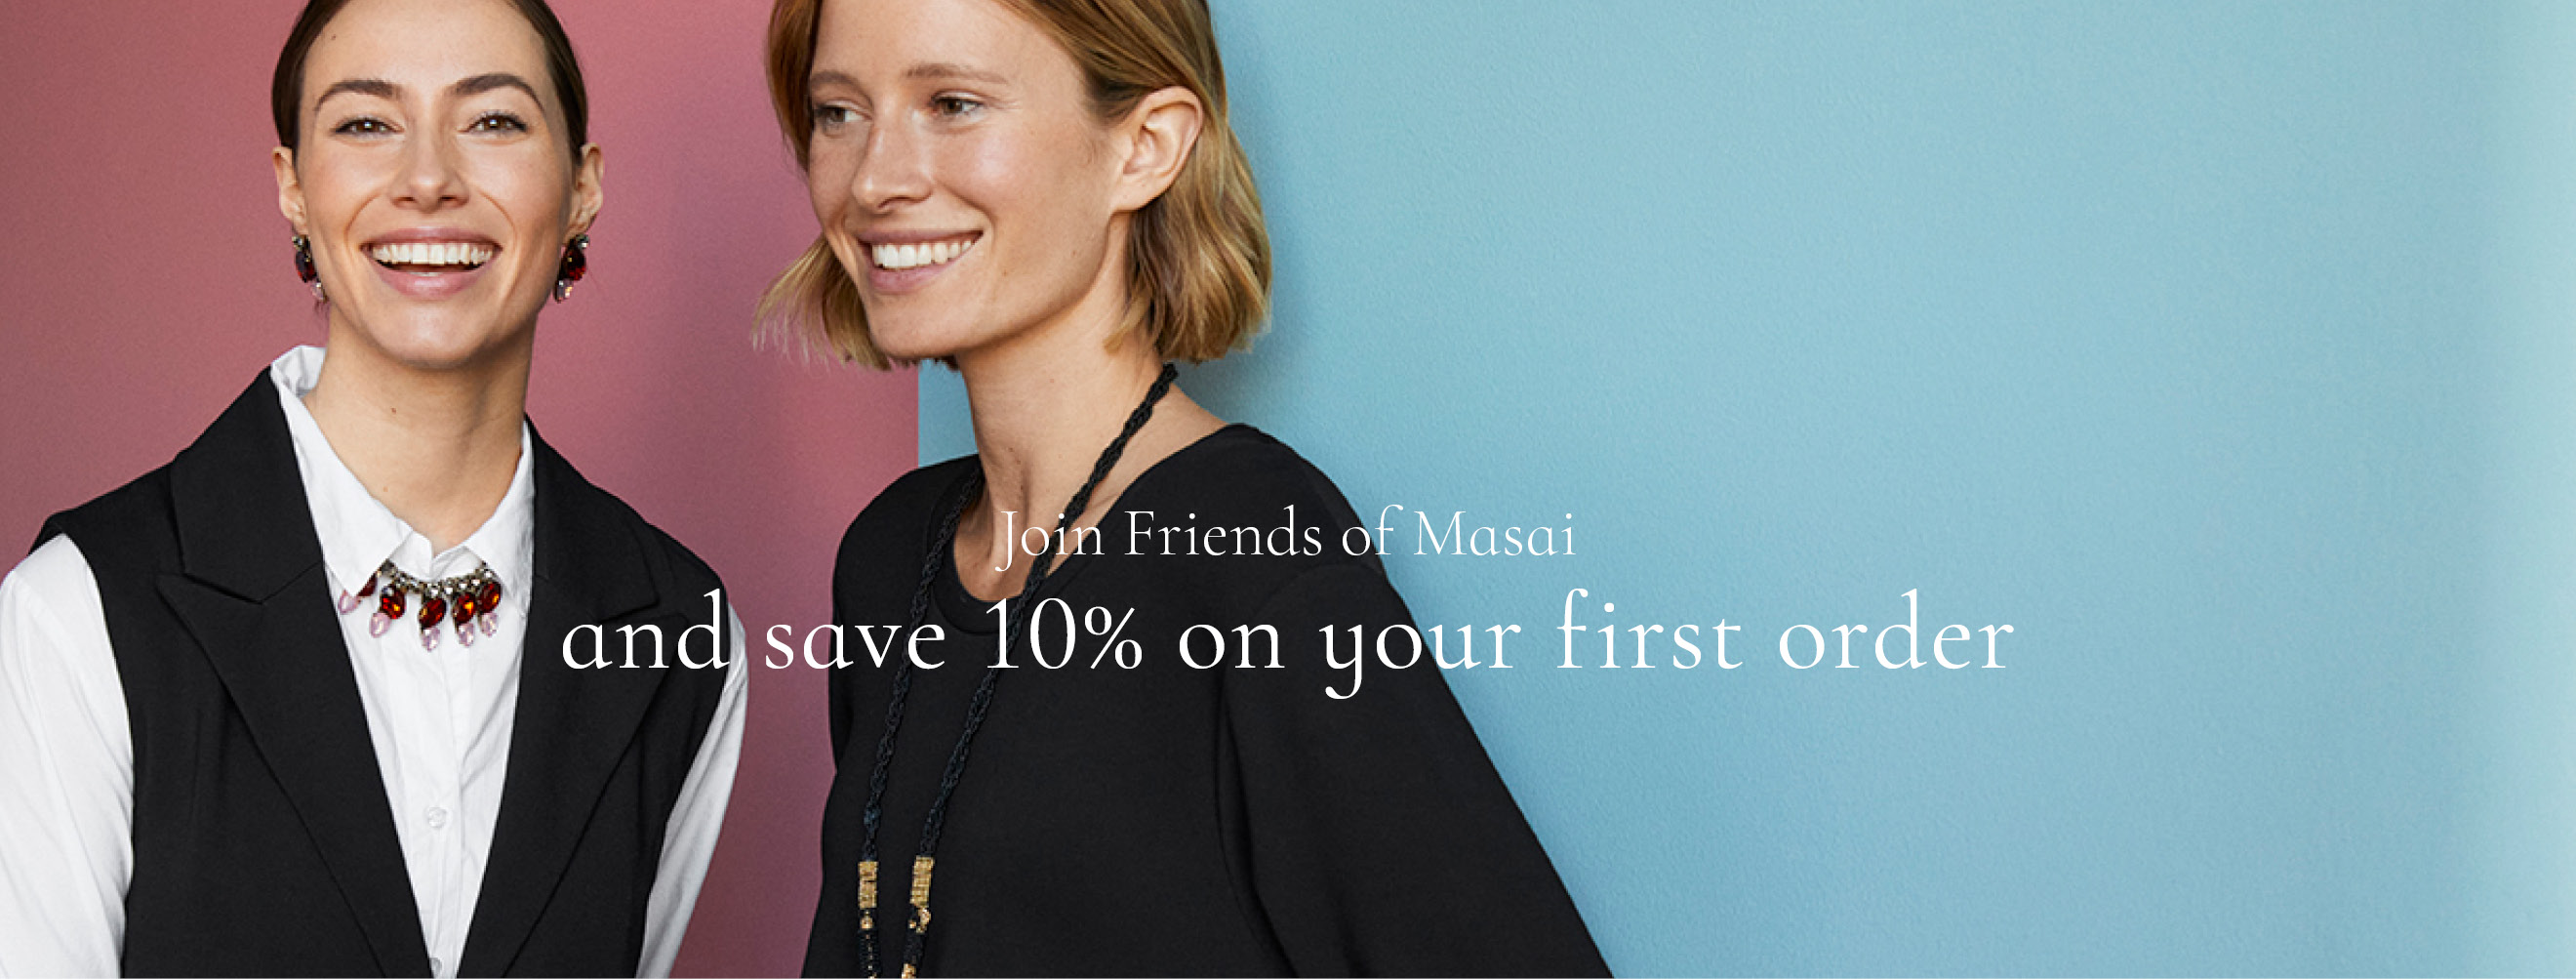 Sign up to Friends of Masai